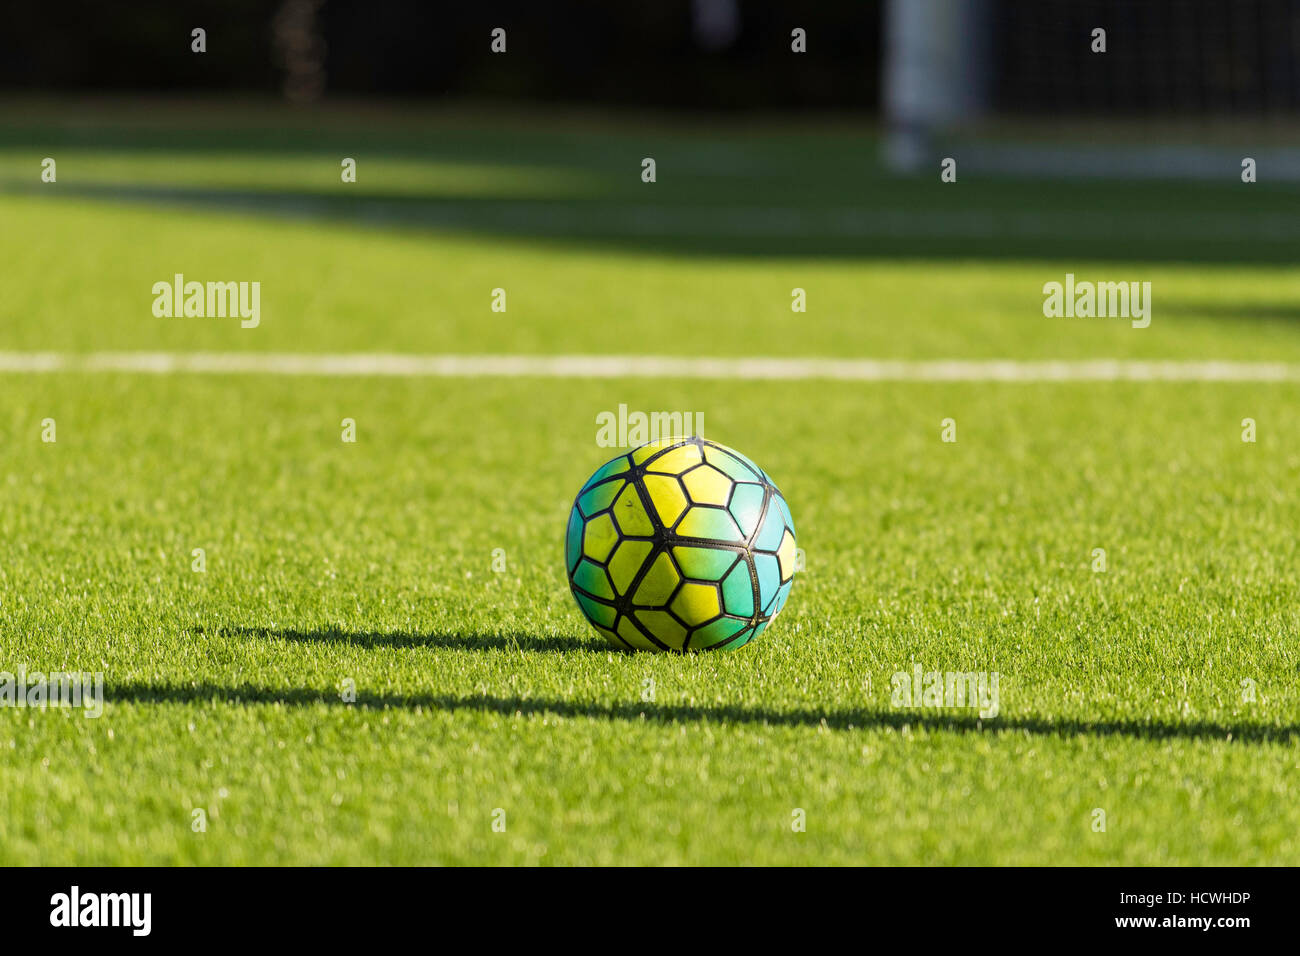 Young footballer in control of the ball on a Astra Turf pitch Stock Photo -  Alamy